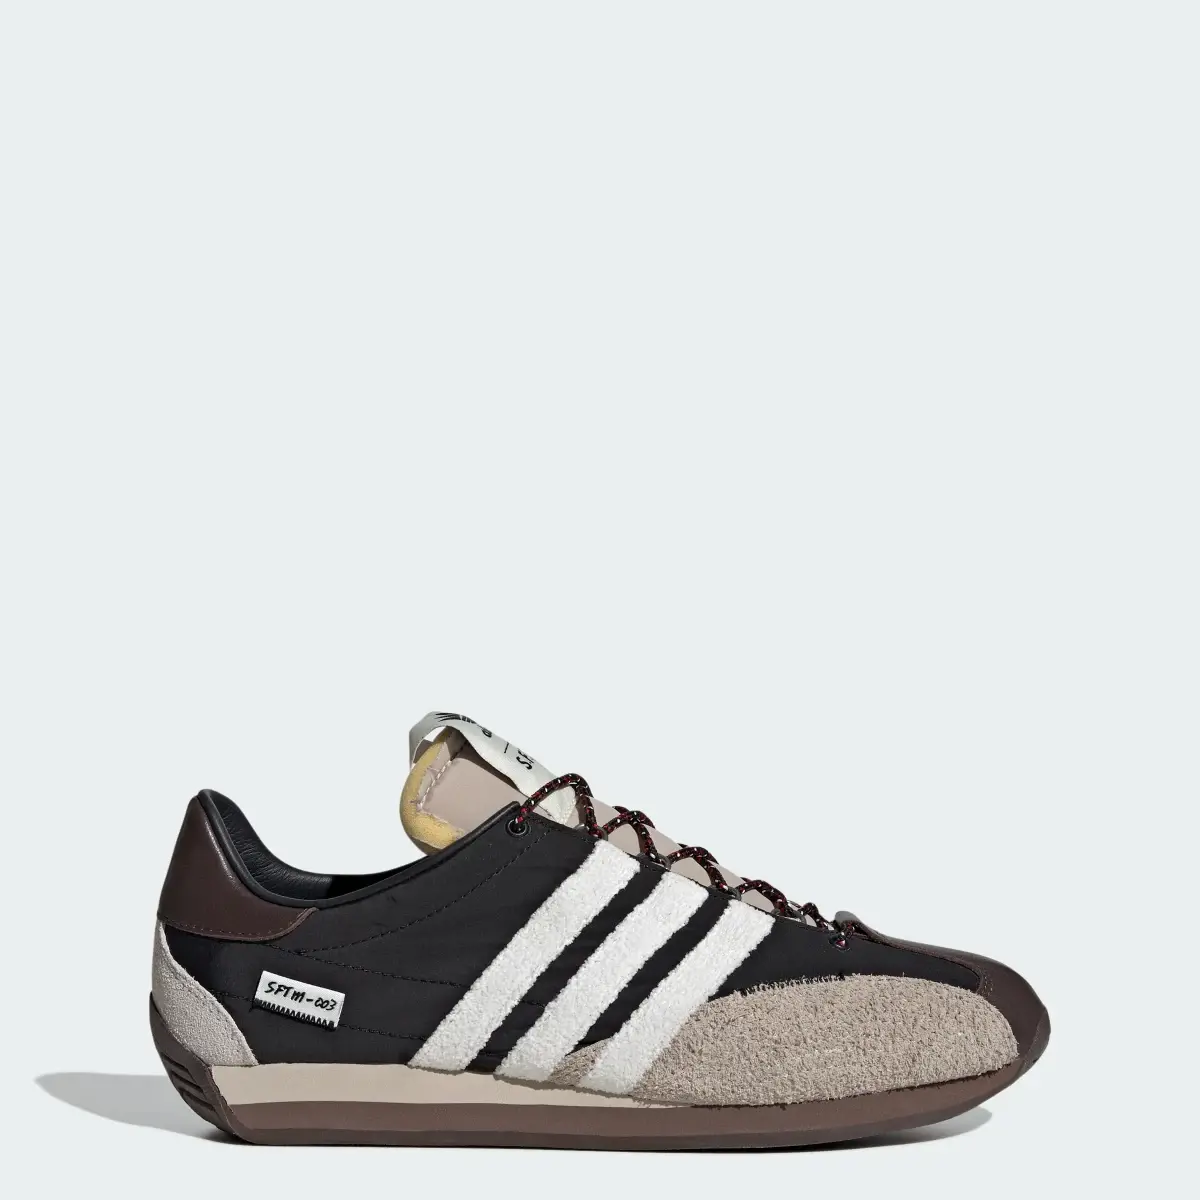 Adidas Zapatilla Country OG Low. 1